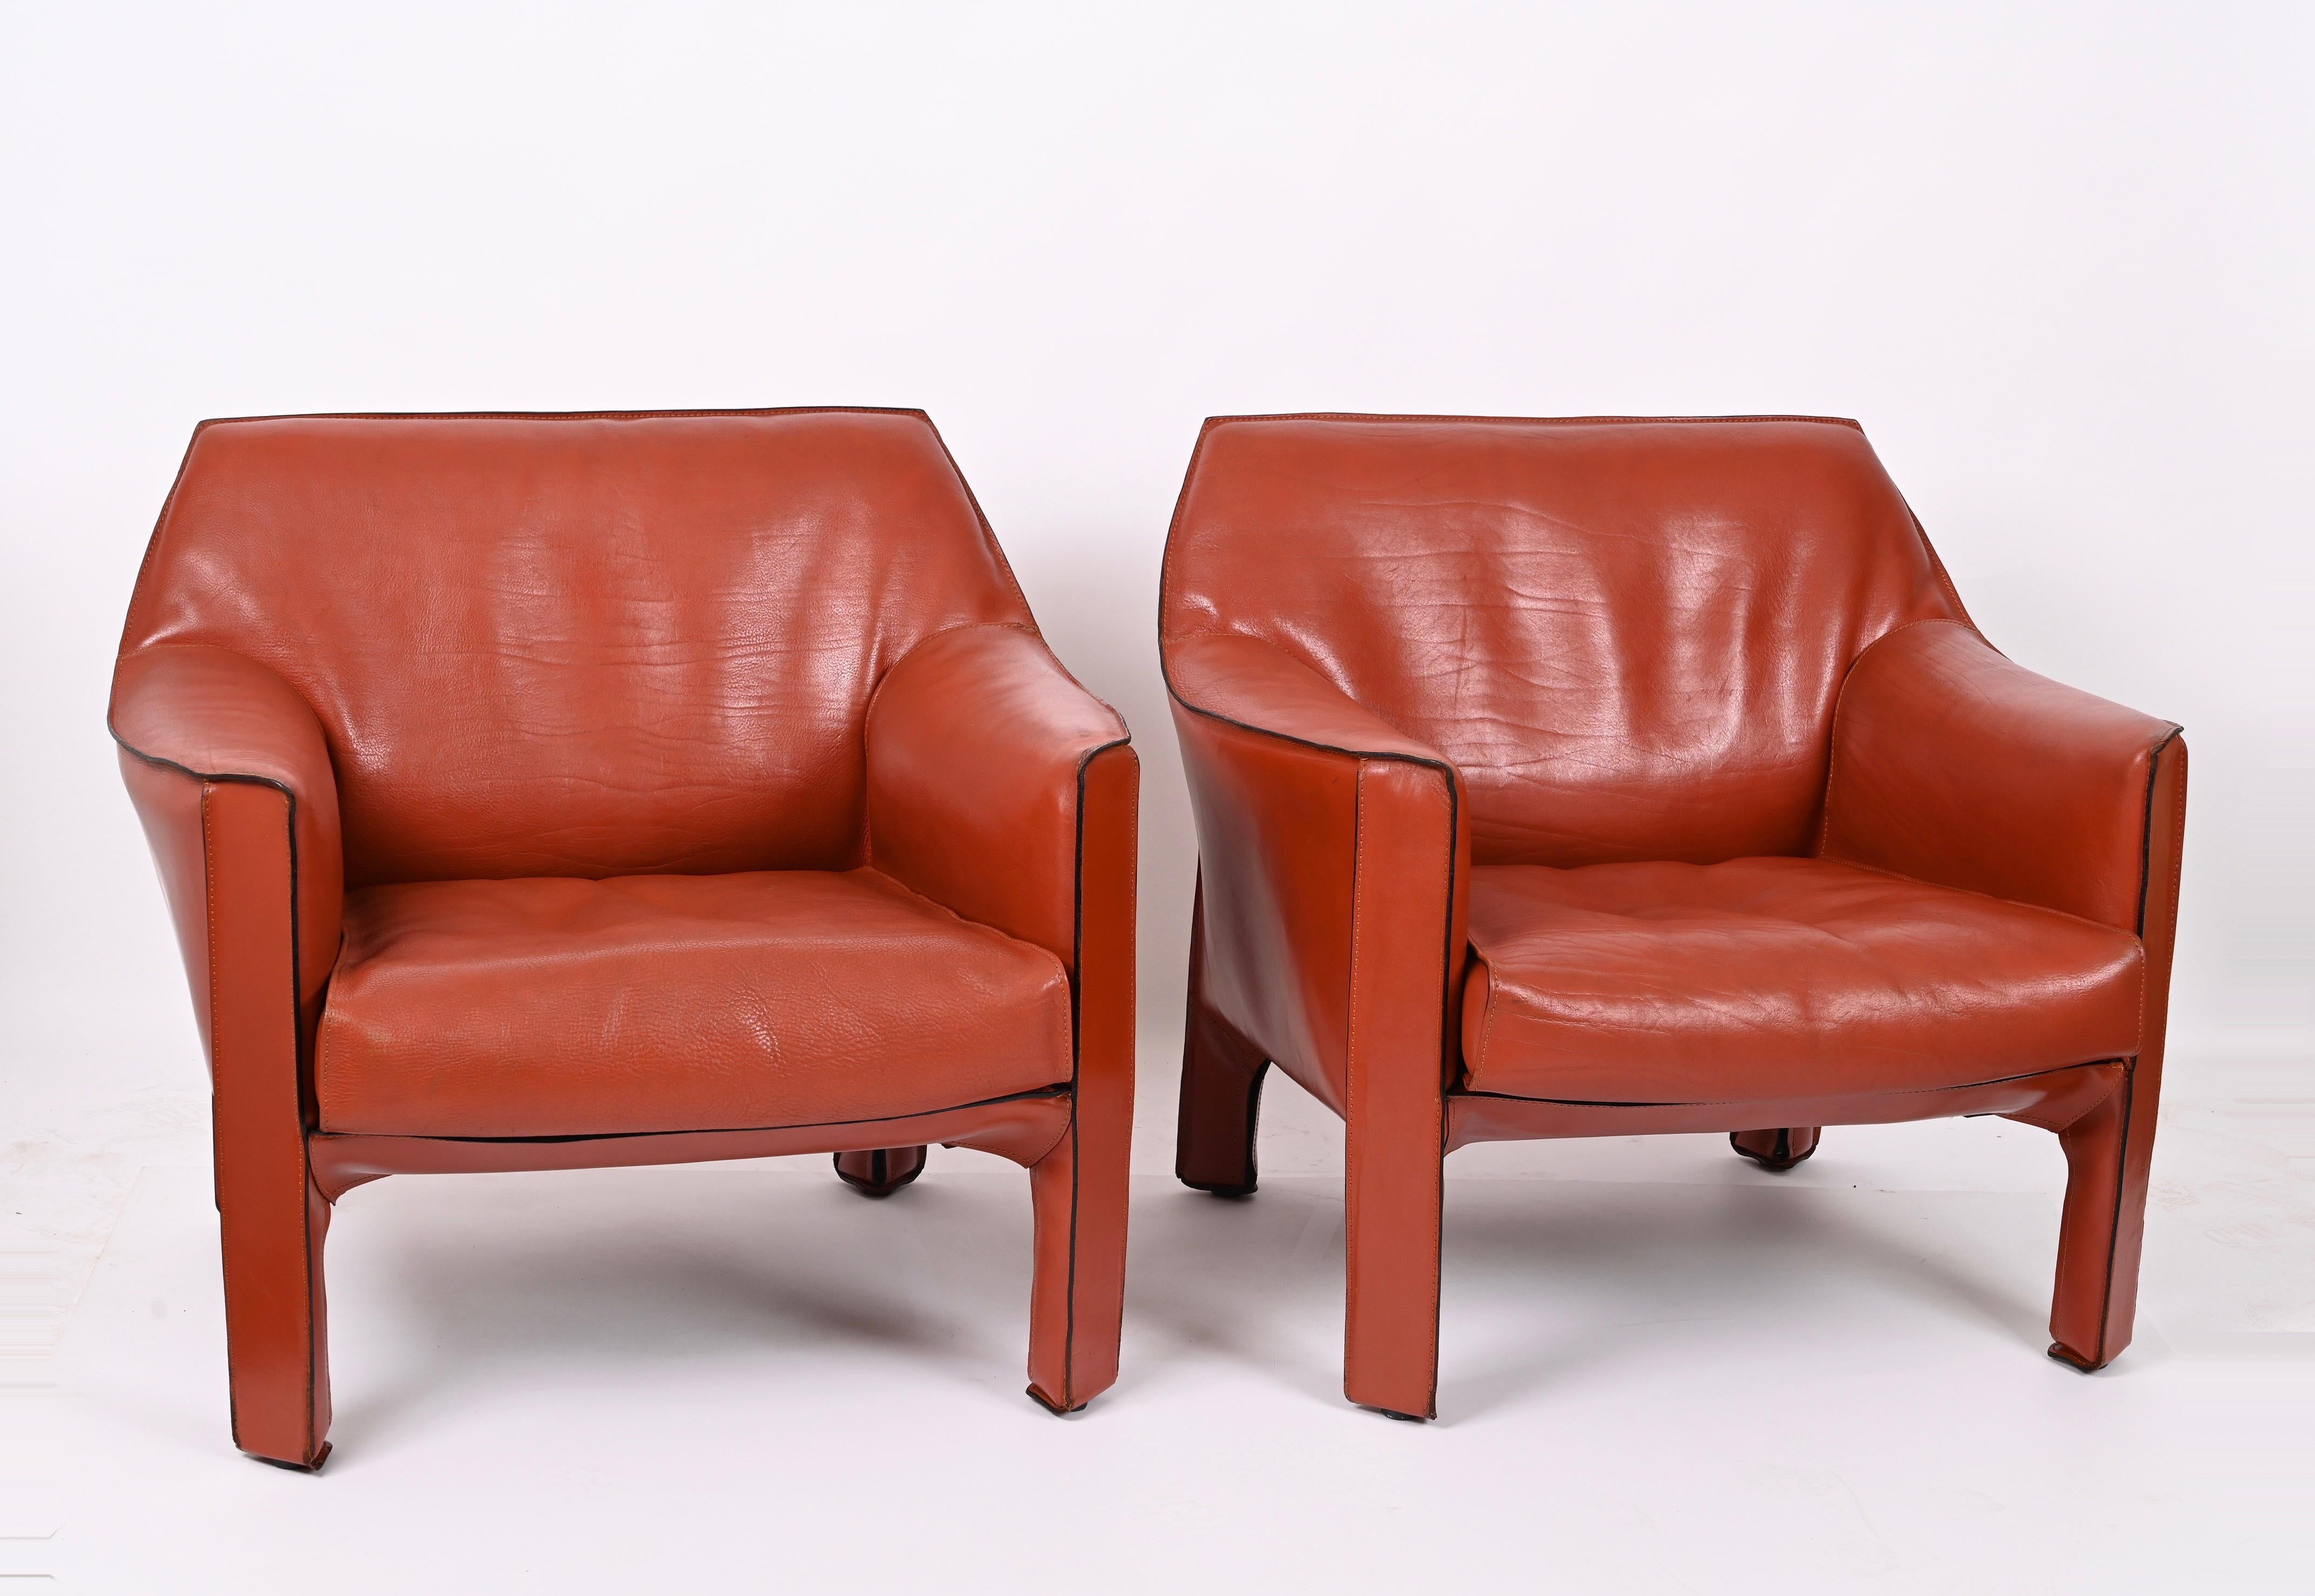 20th Century Mario Bellini for Cassina Pair of Cab 415 Leather Club Chairs Signed Italy 1980s